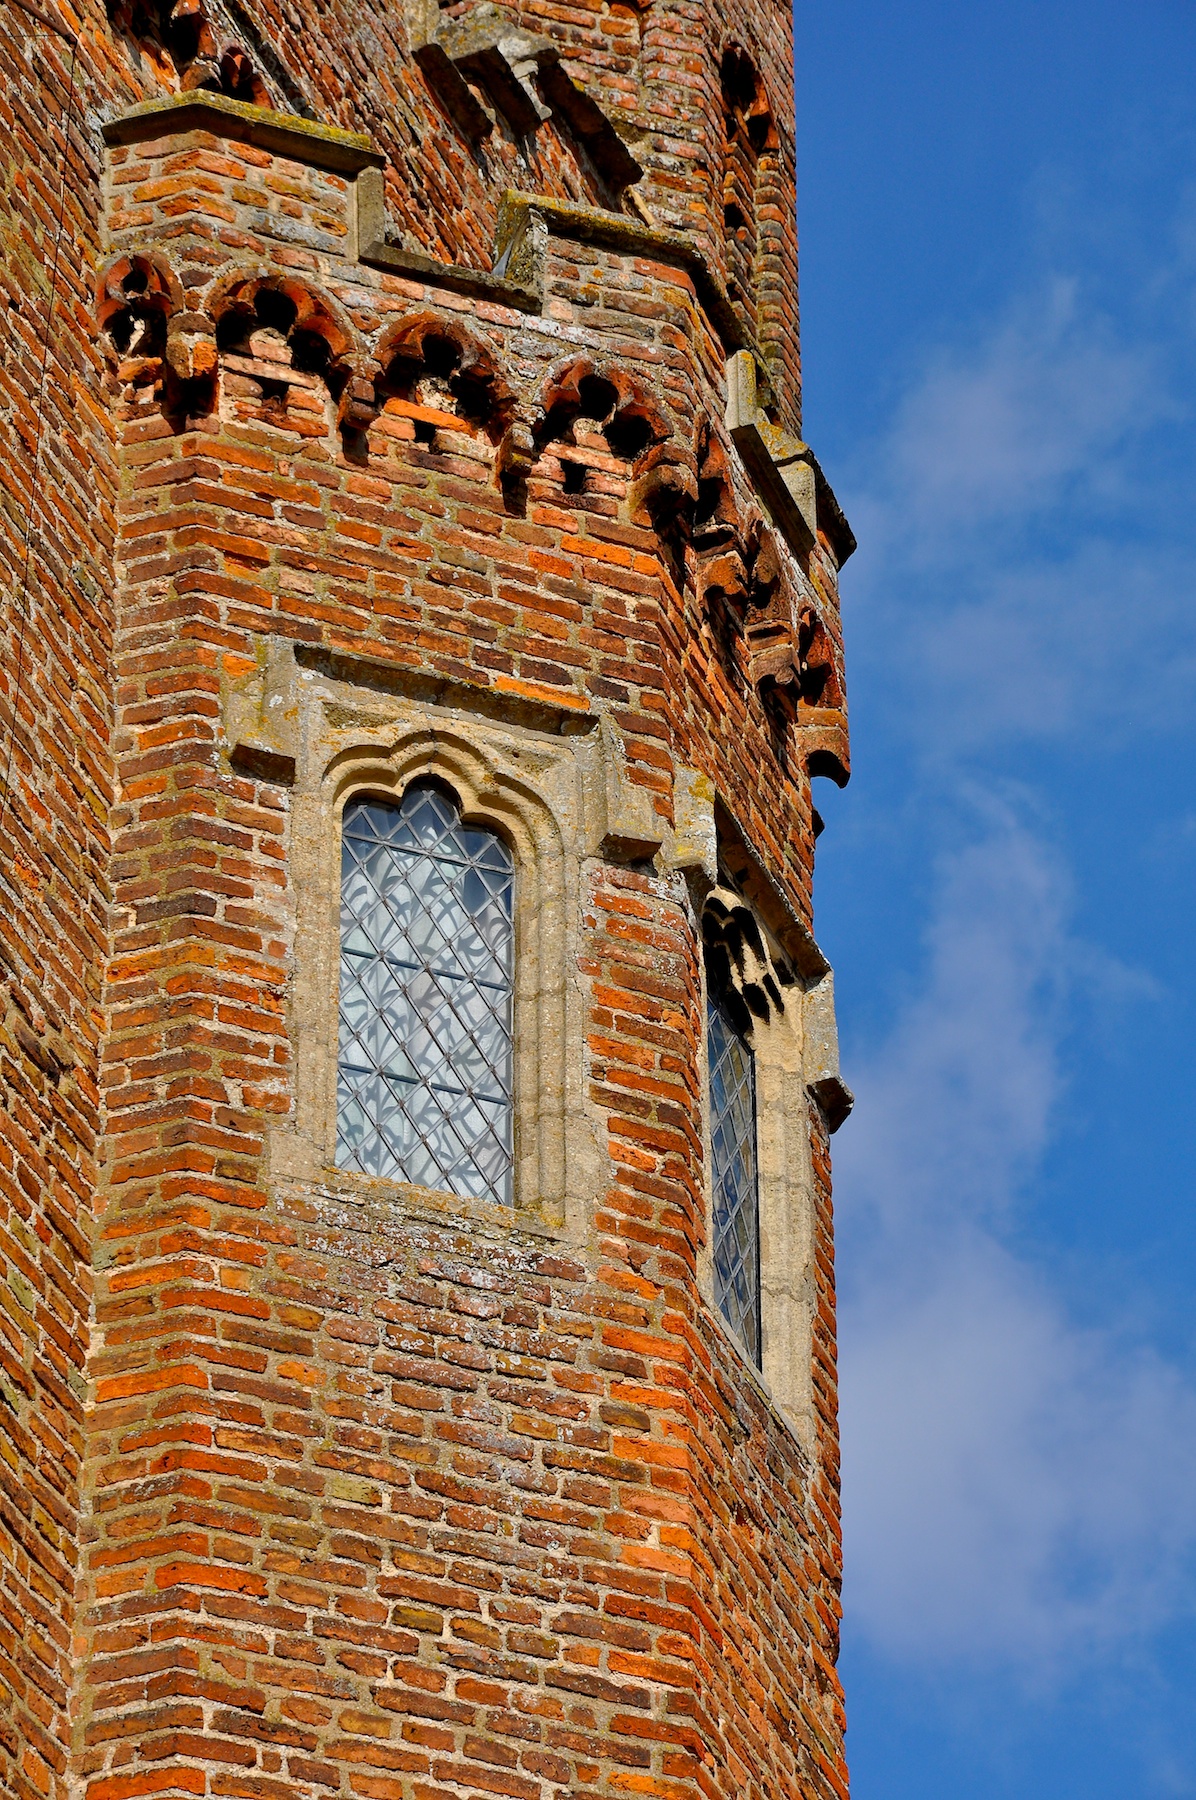 the large brick tower has two glass windows